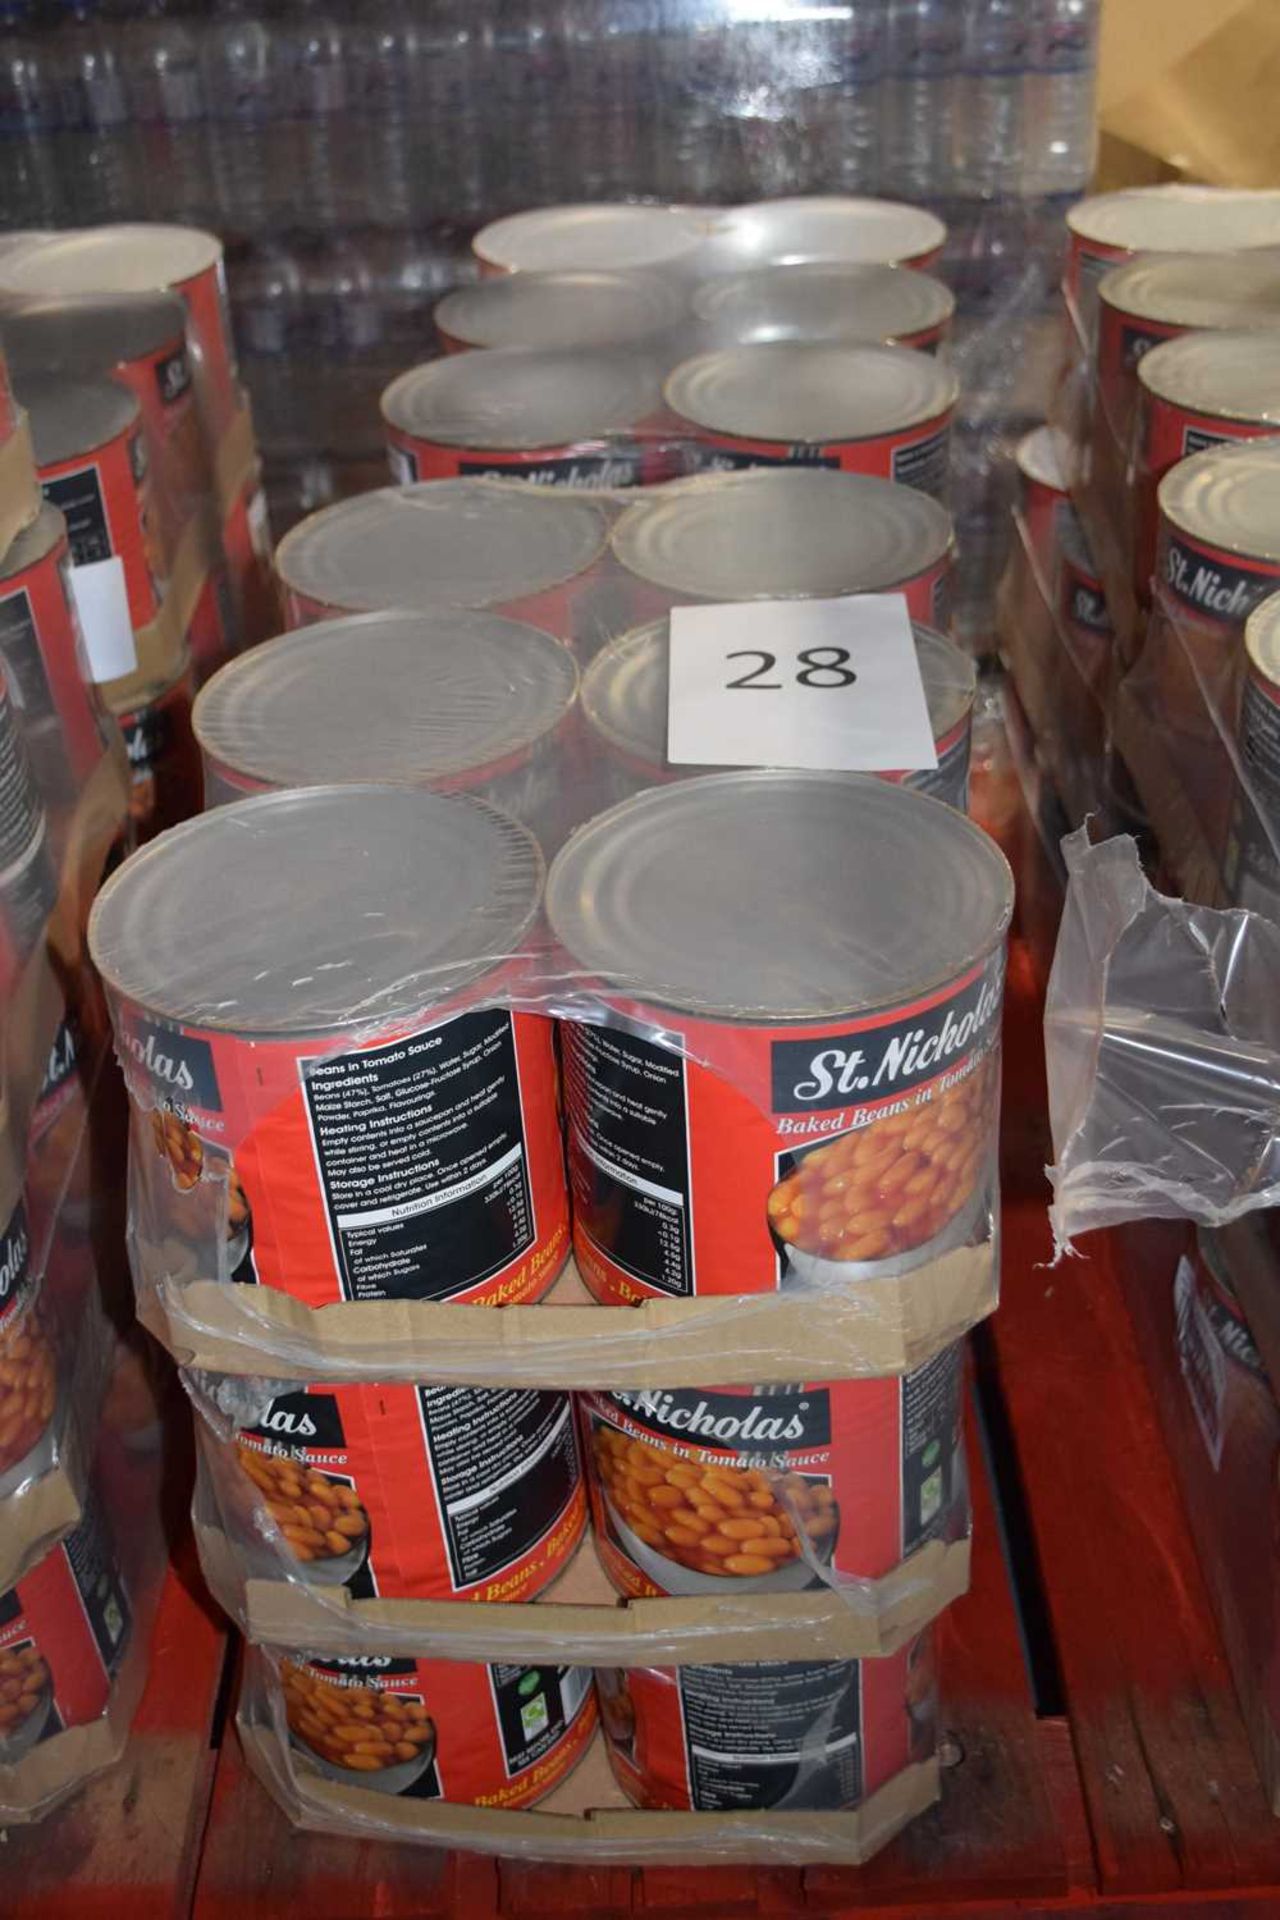 Six packs of St Nicholas Baked Beans in Tomato Sauce, 6x2.6kg tins per pack. Best Before Date: Jan